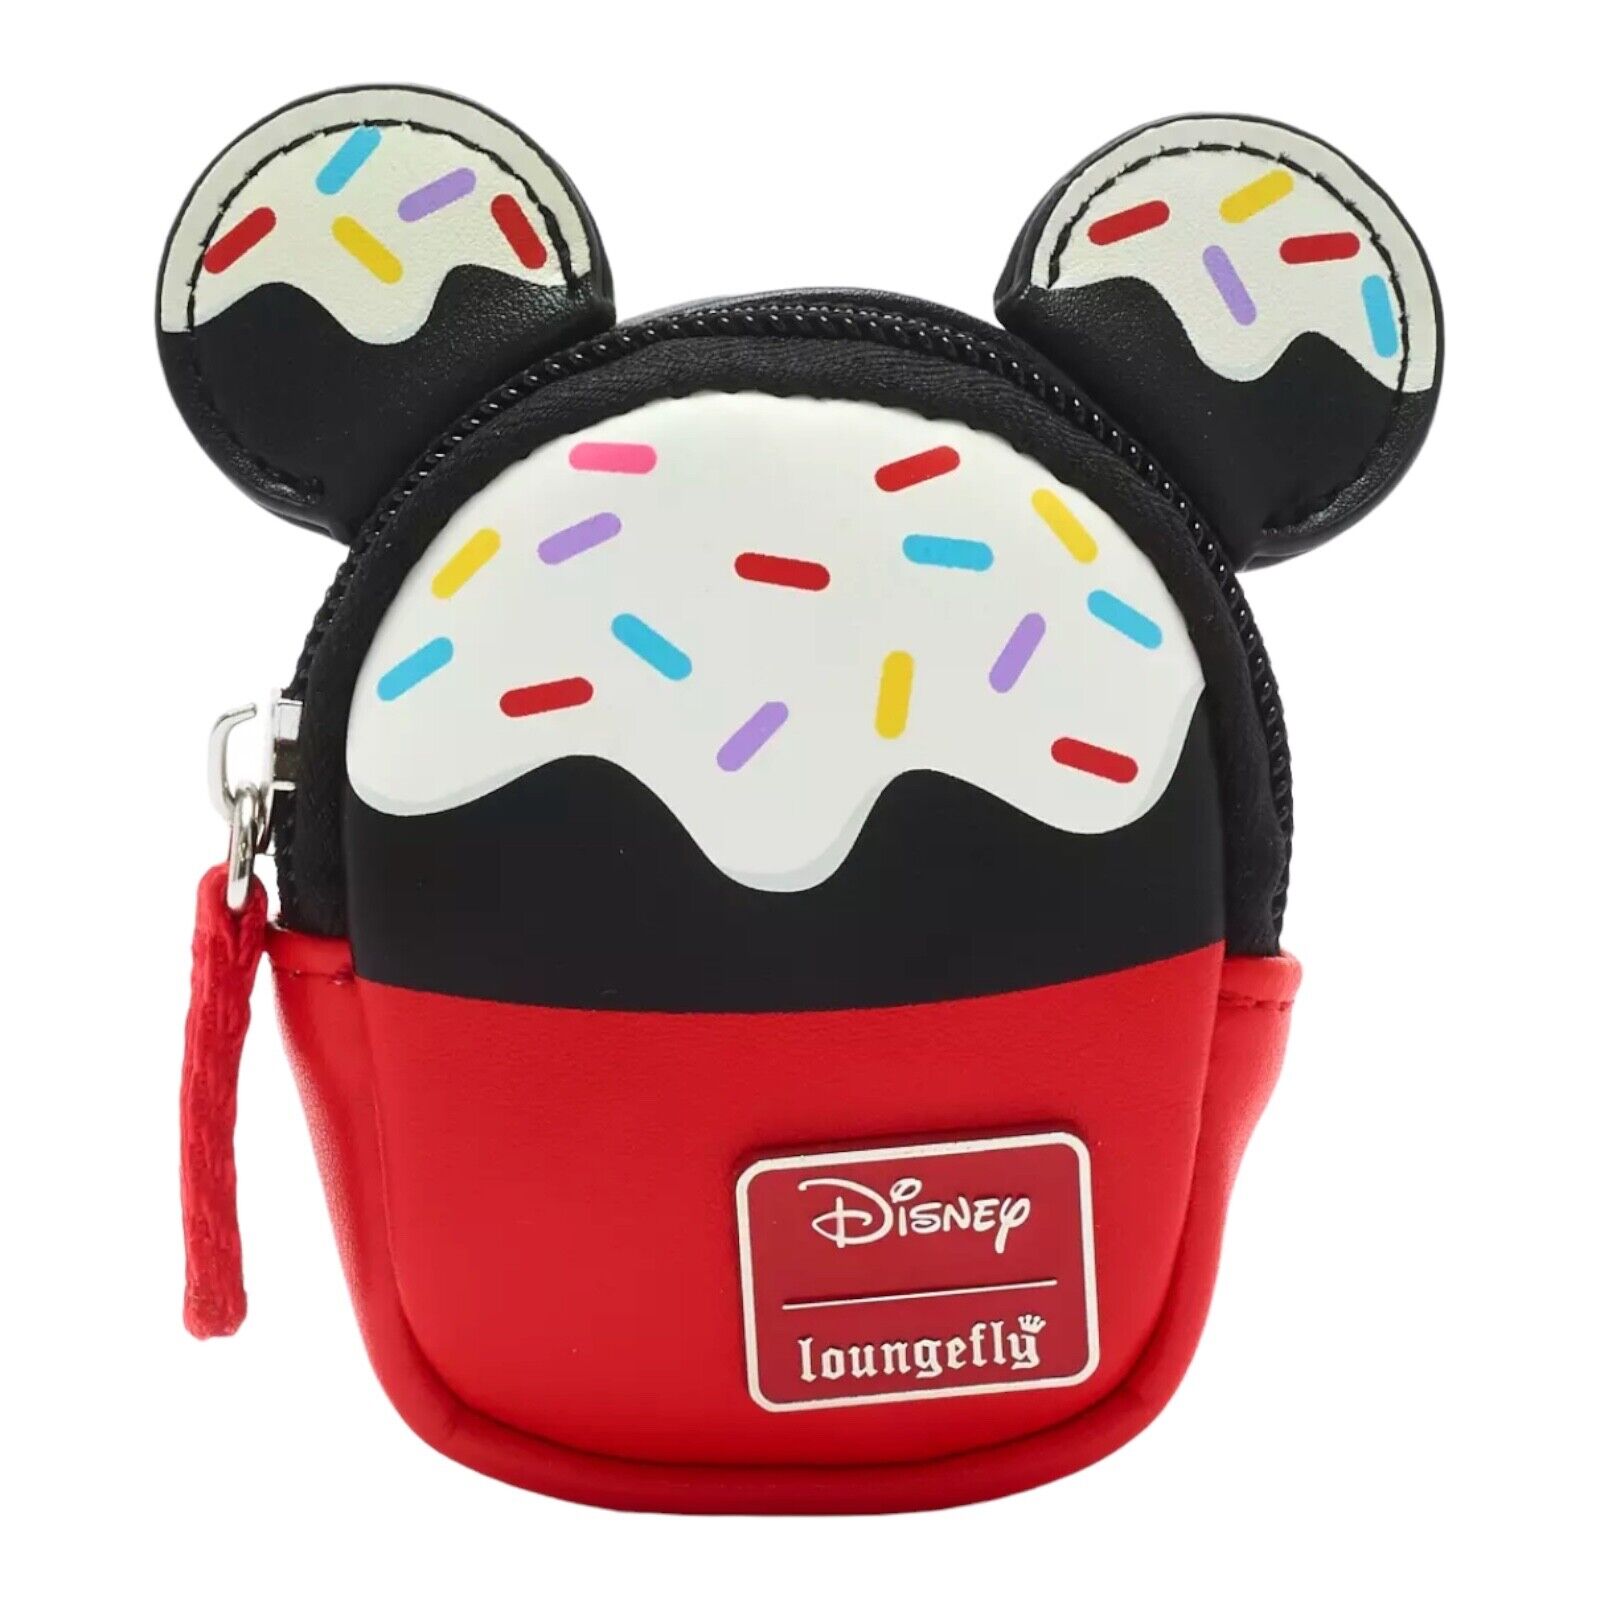 Disney nuiMOs Mickey Mouse Sprinkle Cupcake Ice Cream Backpack by Loungefly